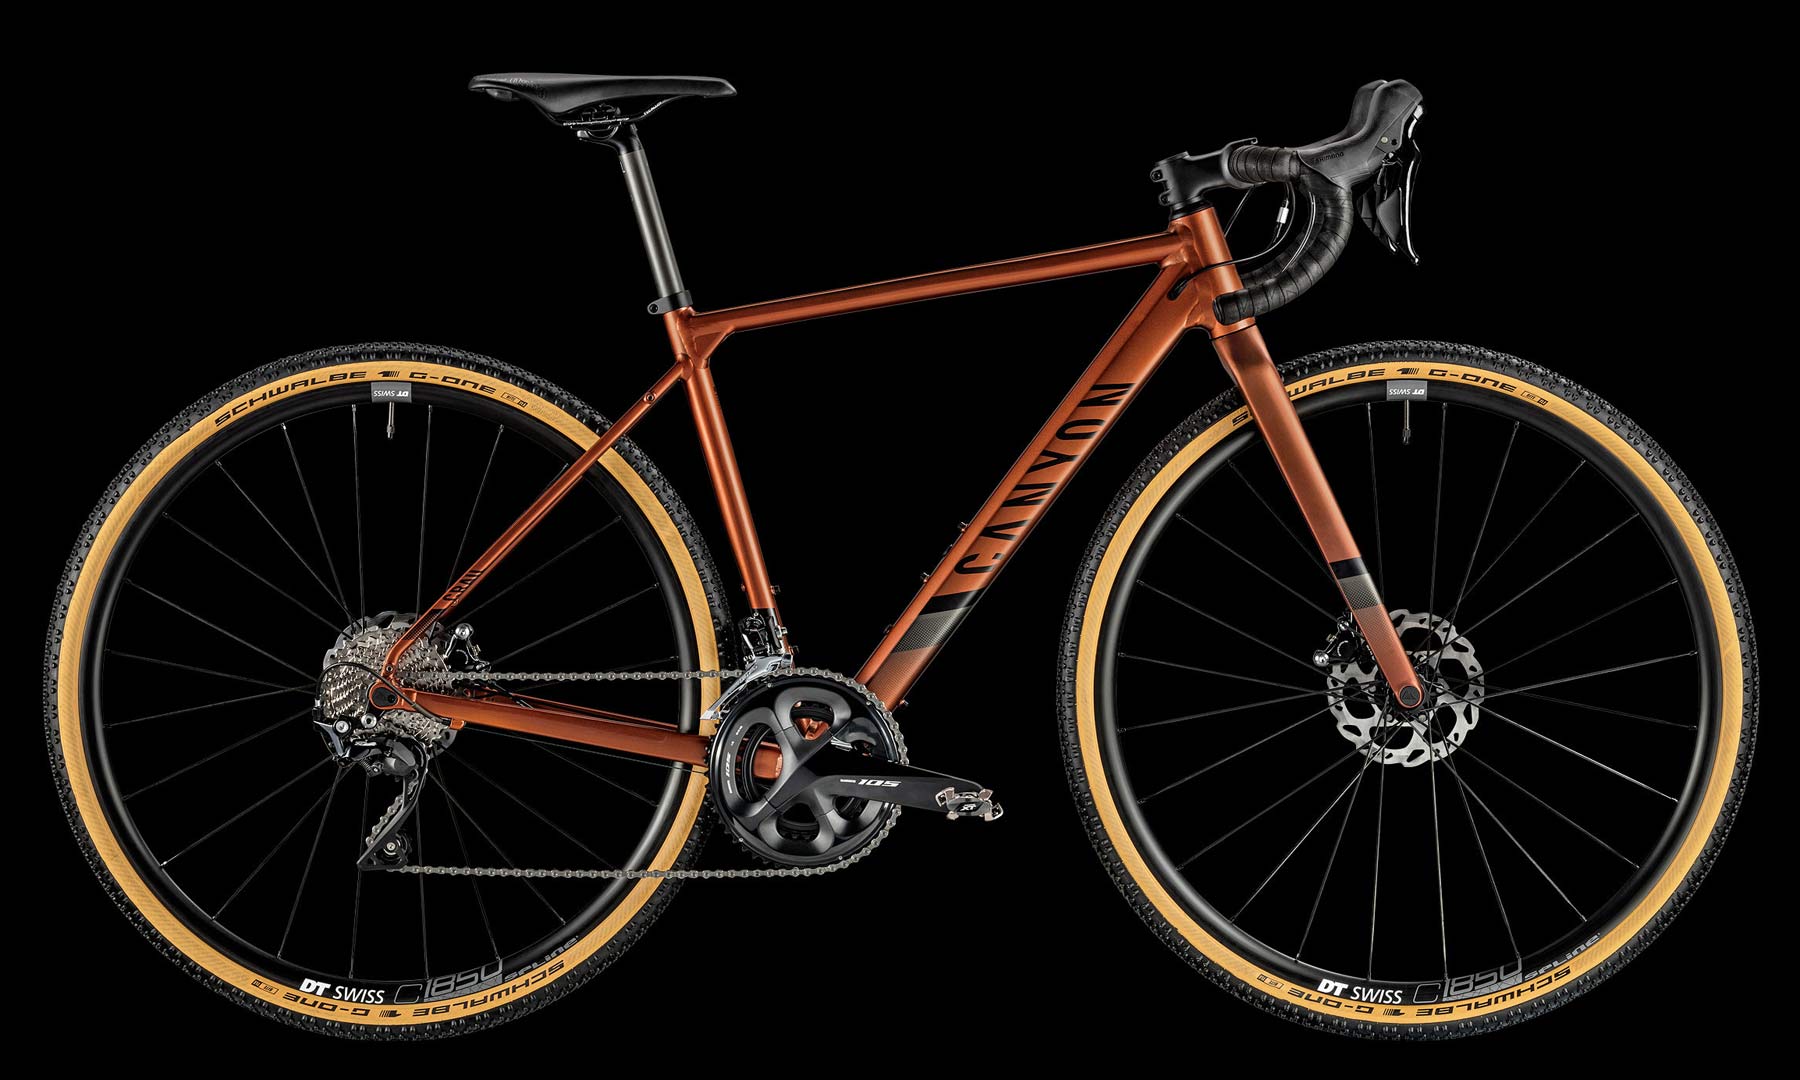 2019 Canyon Grail AL affordable aluminum alloy gravel bike all road bike with conventional two-piece drop bar 